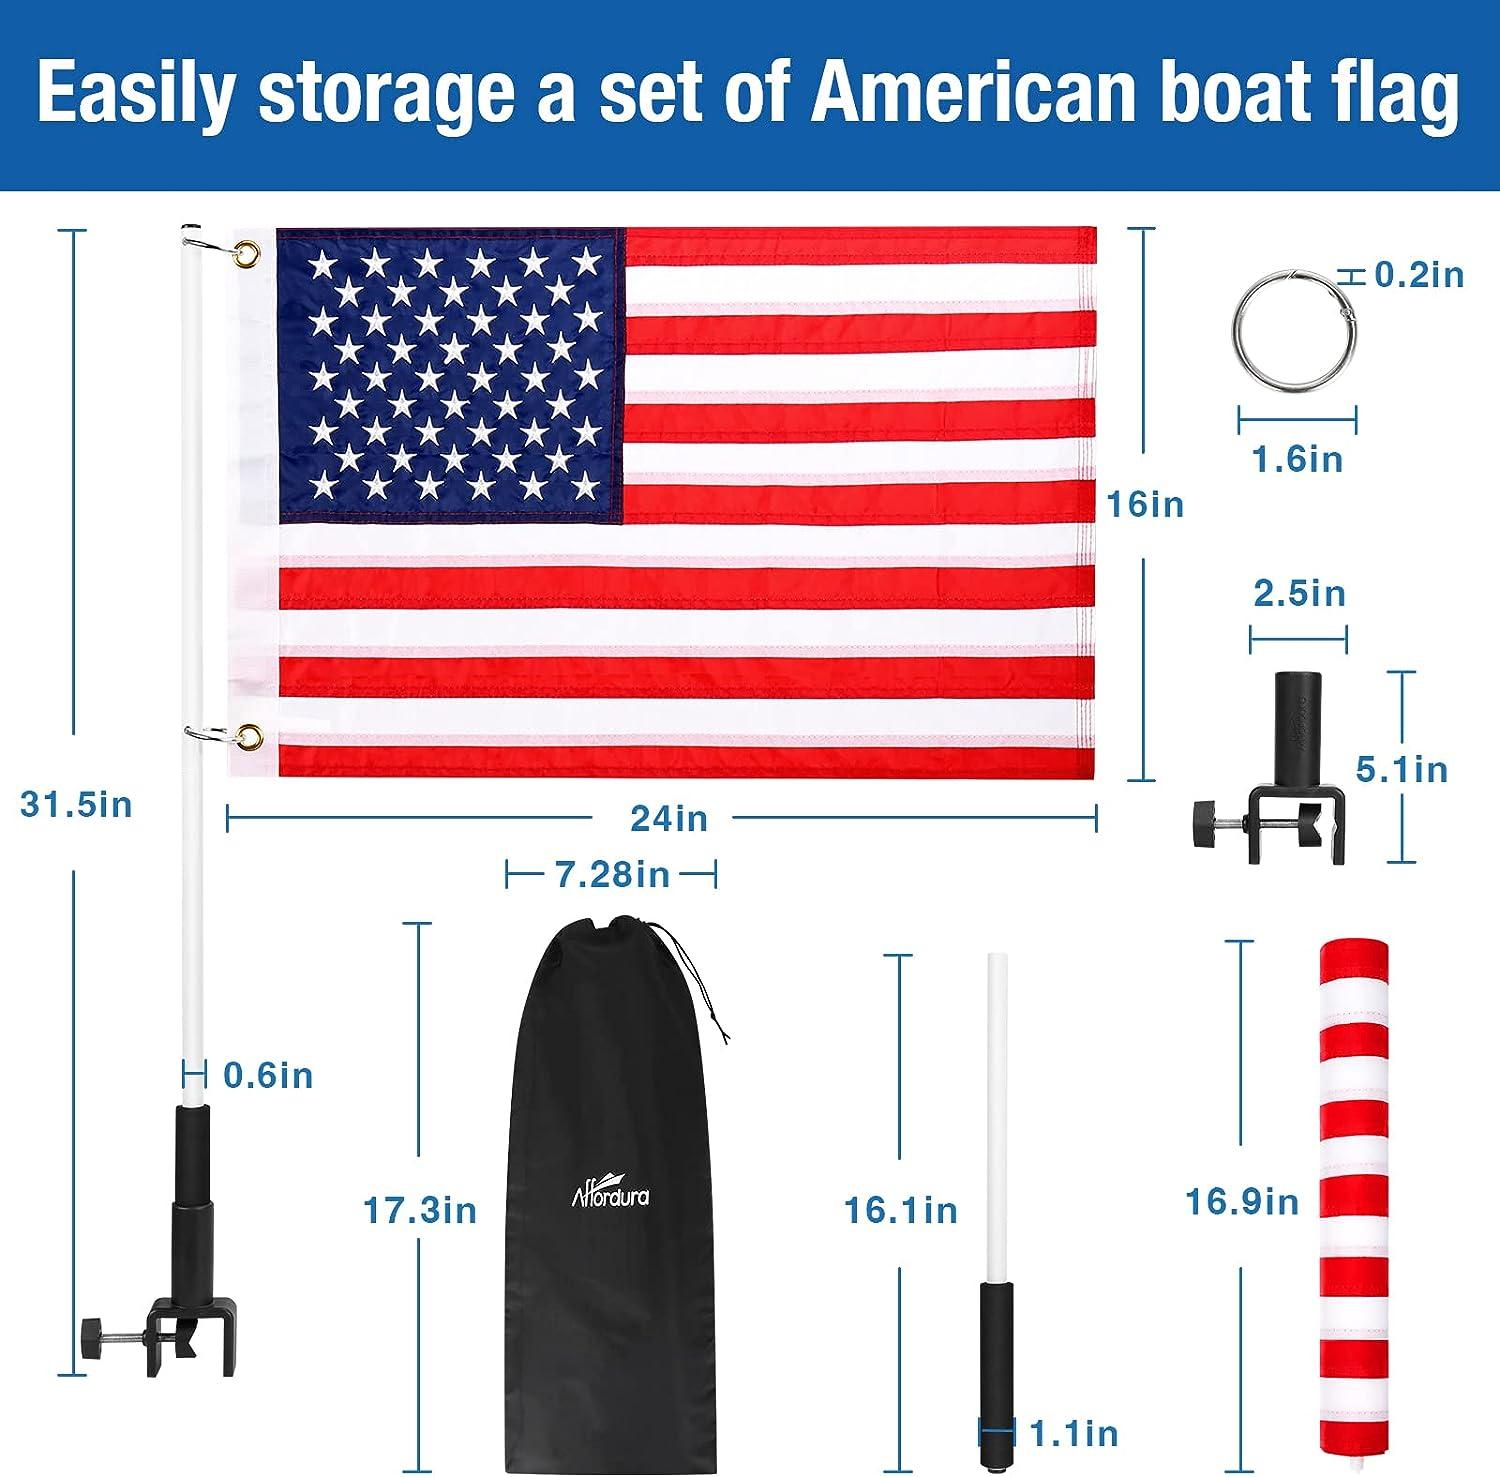 Affordura Boat American Flag with Pole 16x24 Boat Flag Pole Mount for  0.5-1.33 Inch Round and Pontoon Square Rails with 2 American Boat Flag  Clips blue 16x24